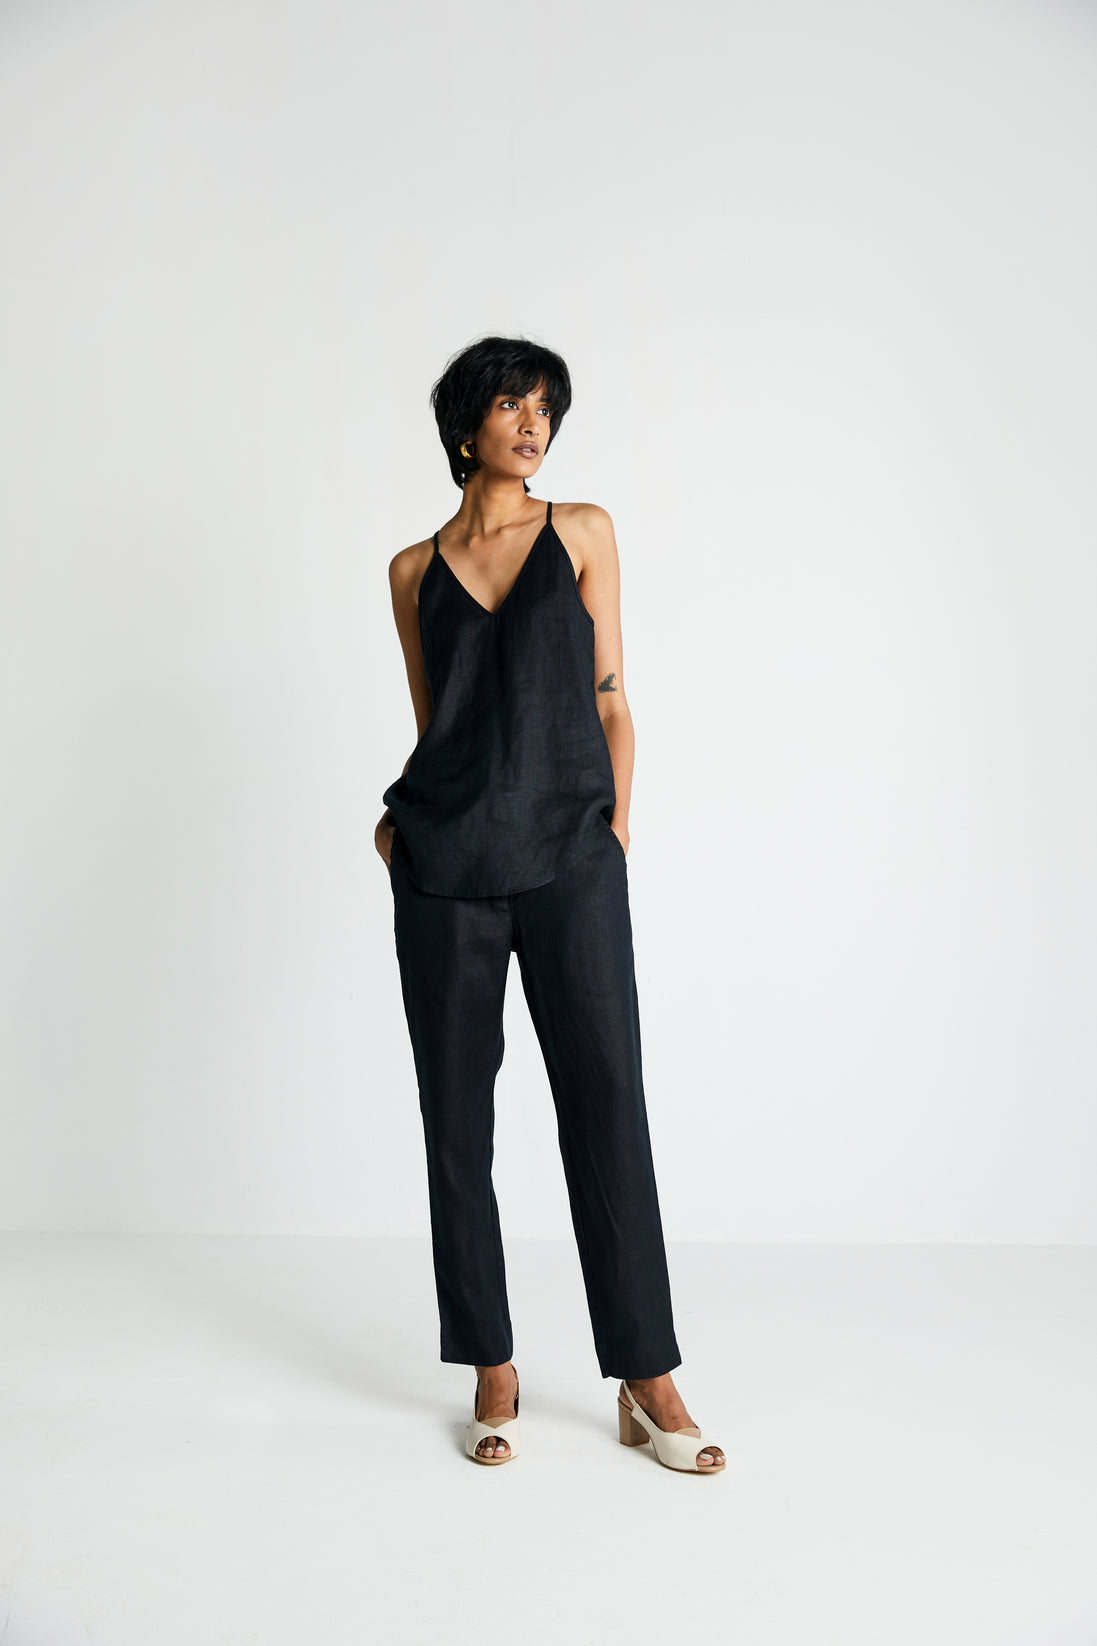 Black Endless Sunday Top by Reistor with Black, Hemp, Hemp Noir by Reistor, Less than $50, Natural, Office Wear, Regular Fit, Solid Selfmade, Solids, Spaghettis, Tops, Womenswear at Kamakhyaa for sustainable fashion